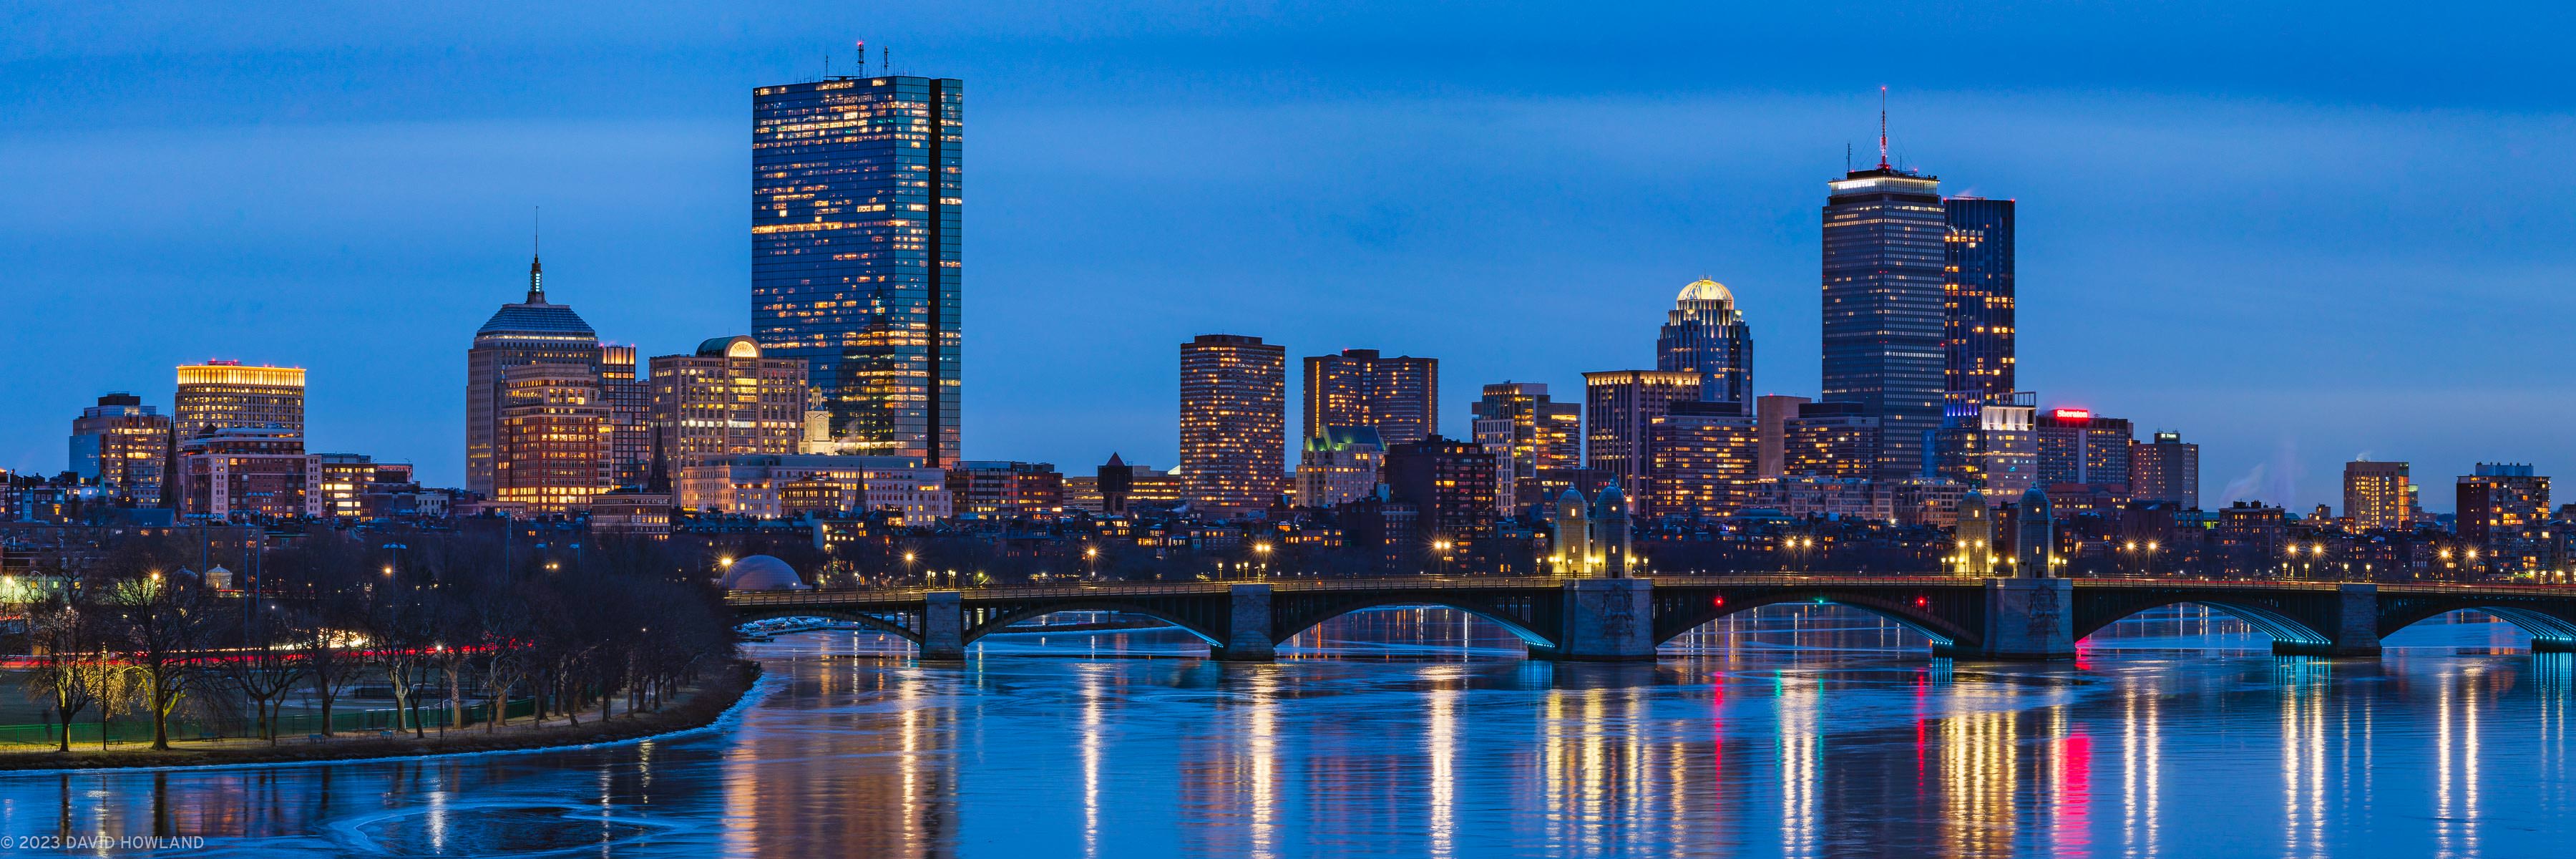 A panorama photo of the city lights of the Boston skyline and the Longfellow Bridge spanning a frozen Charles River at dusk